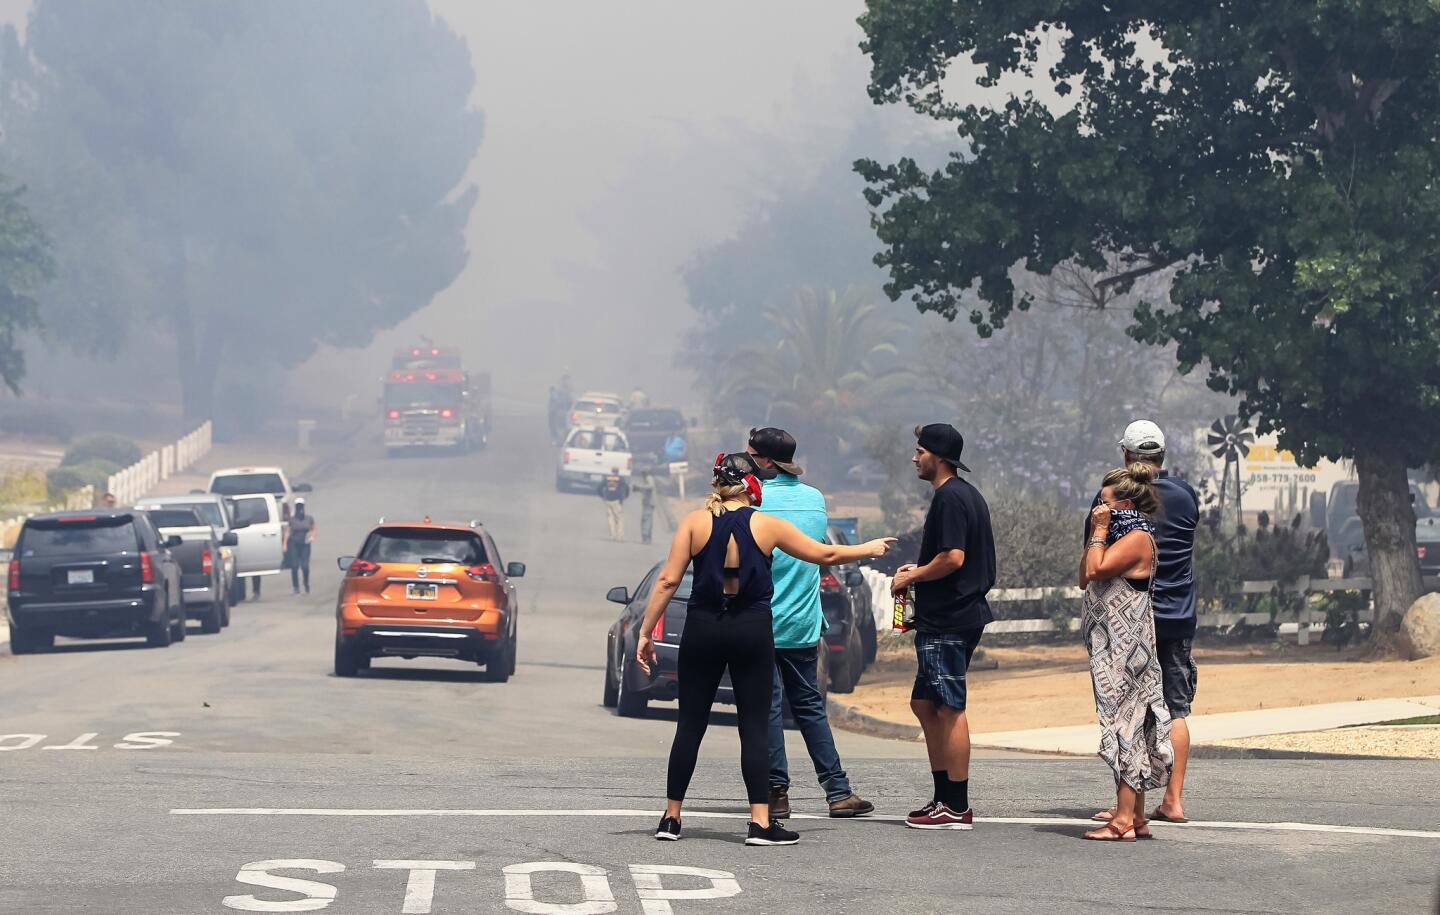 Residents watch fire activity standing at the corner of Highlands View Road and Viejas View Place on Friday during a fire in Alpine, California.